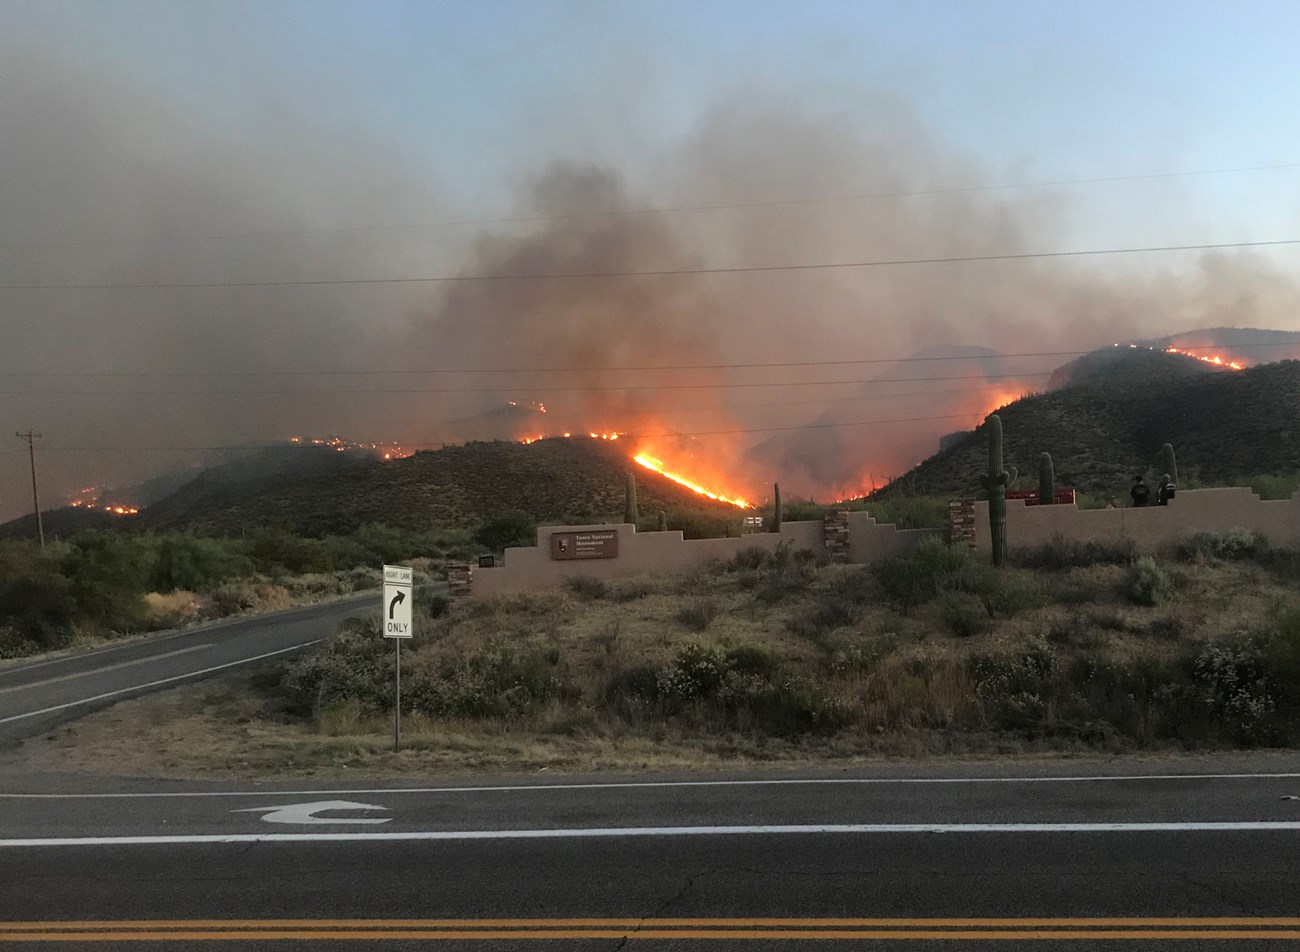 Entrance of Tonto NM with hills on fire